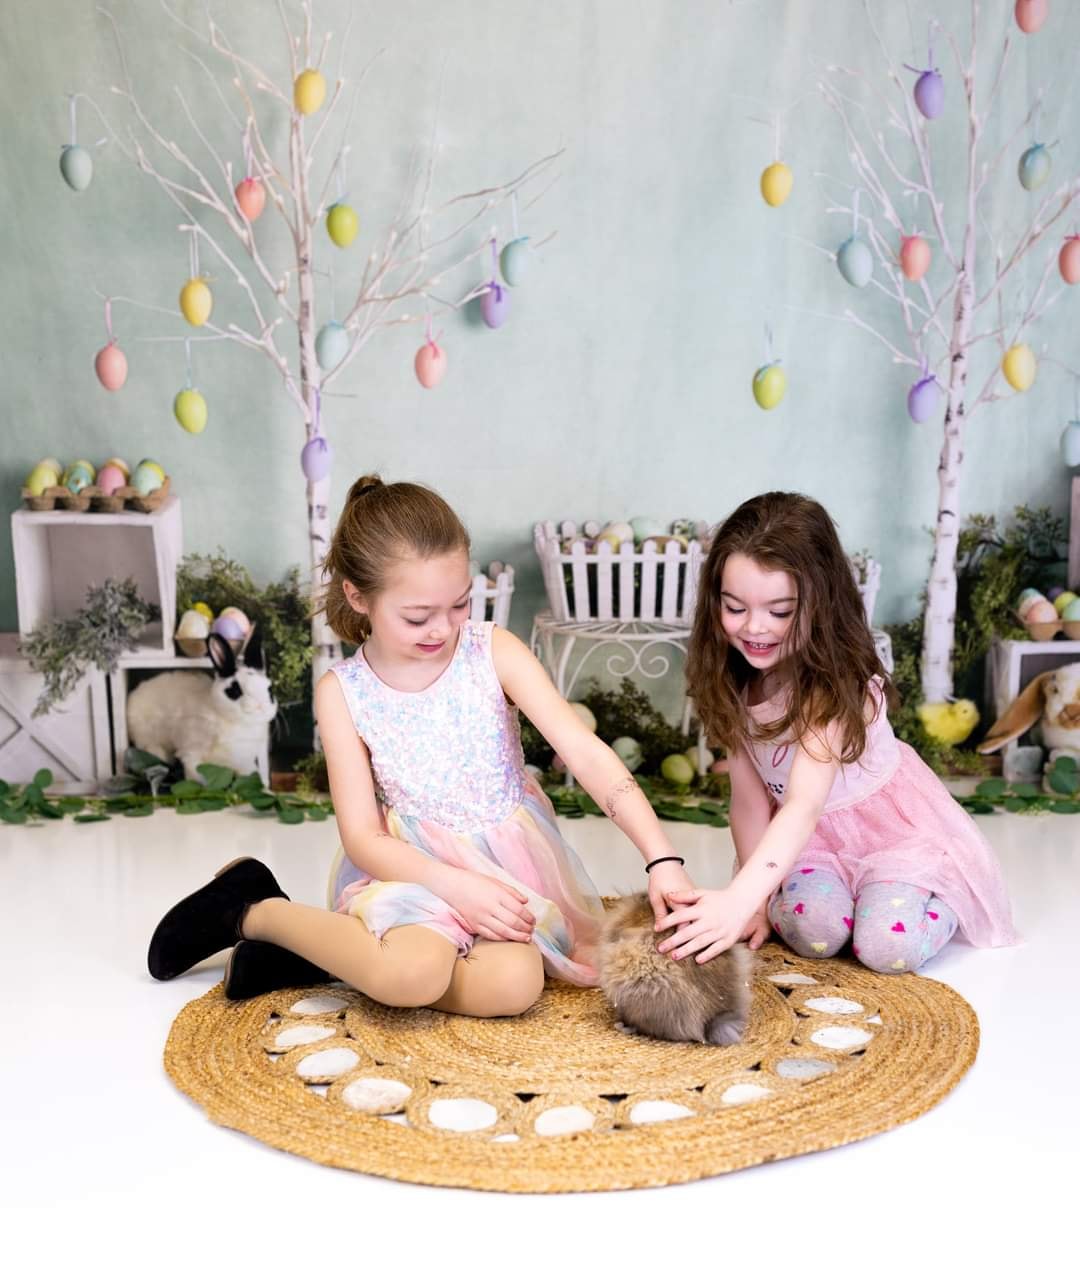 Kate Easter Egg Trees and Bunnies Backdrop Designed By Mandy Ringe Photography